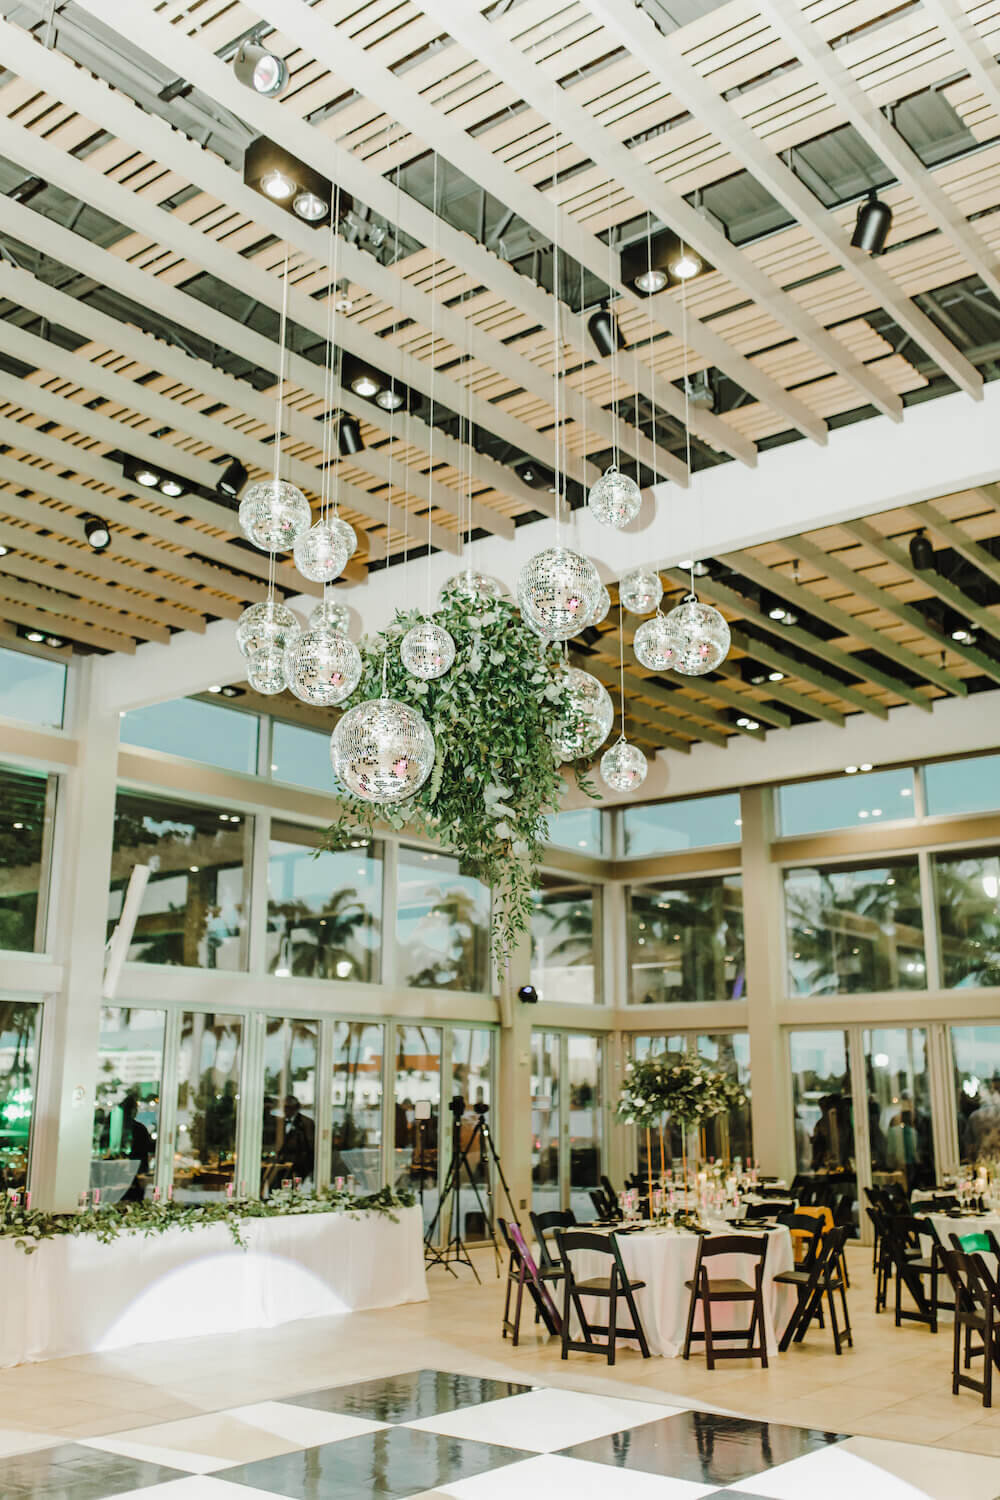 Jackie Lieberman Wedding - venue decorations hanging from ceiling